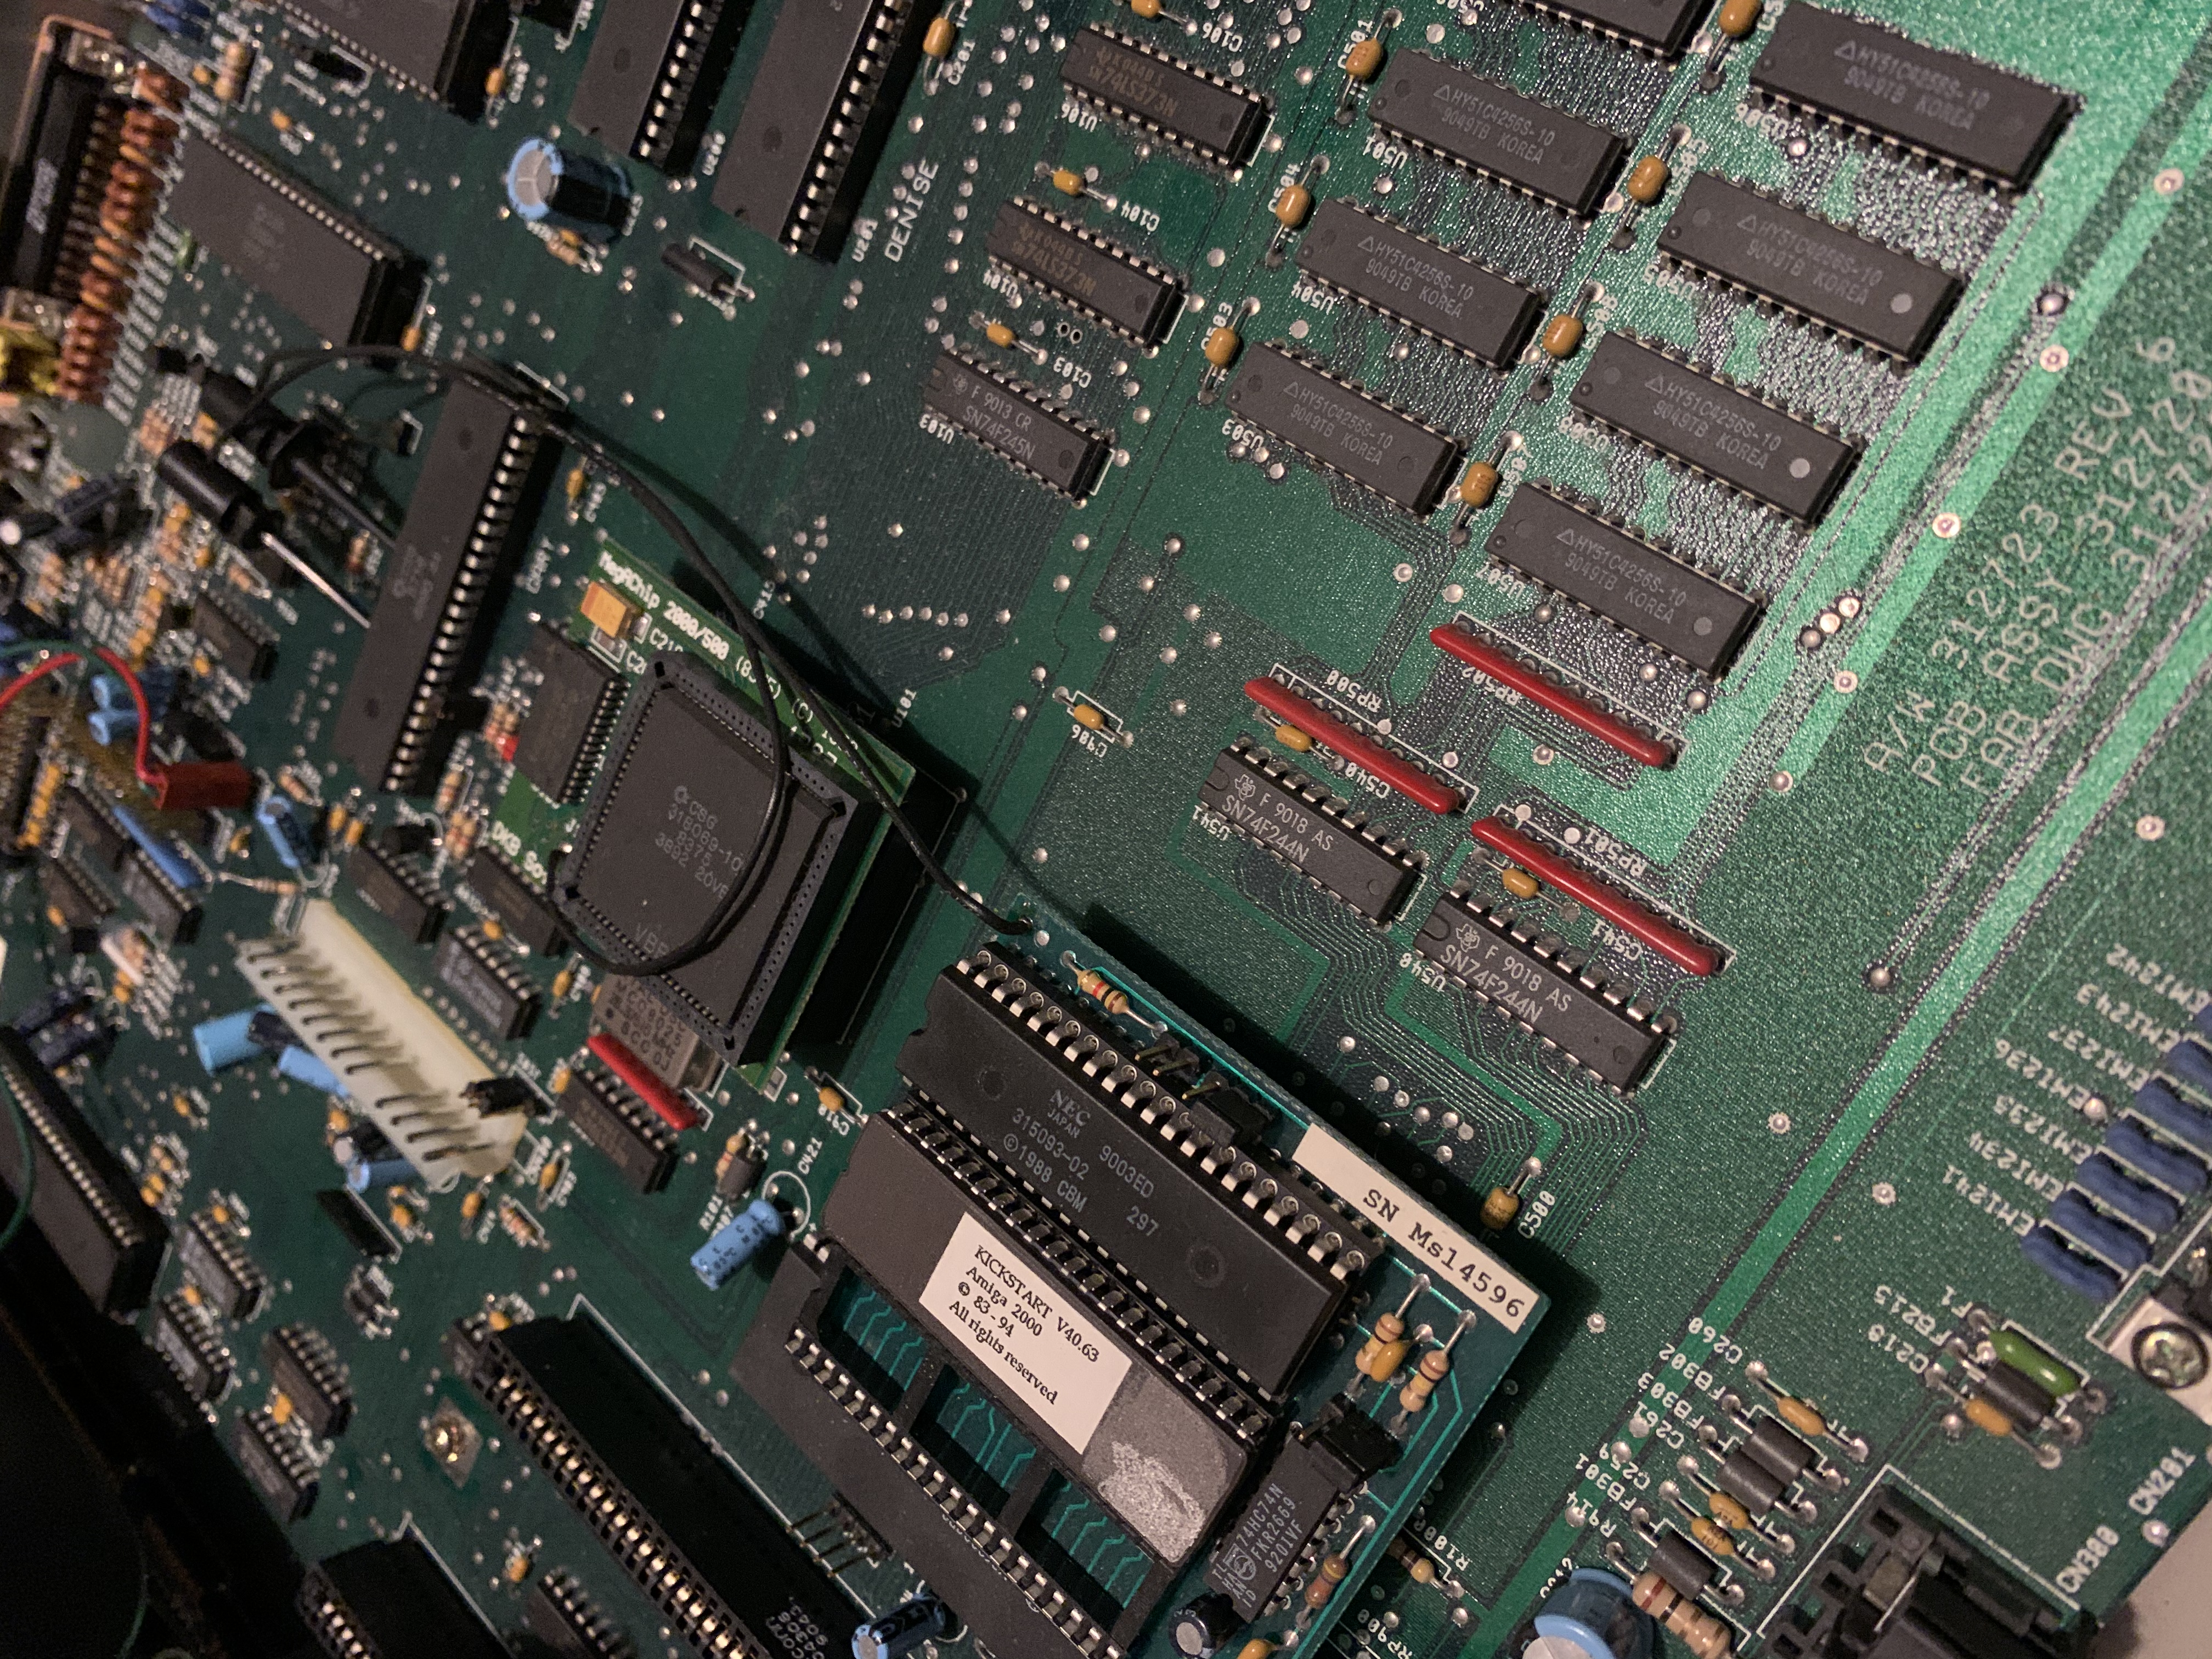 A2000 Motherboard